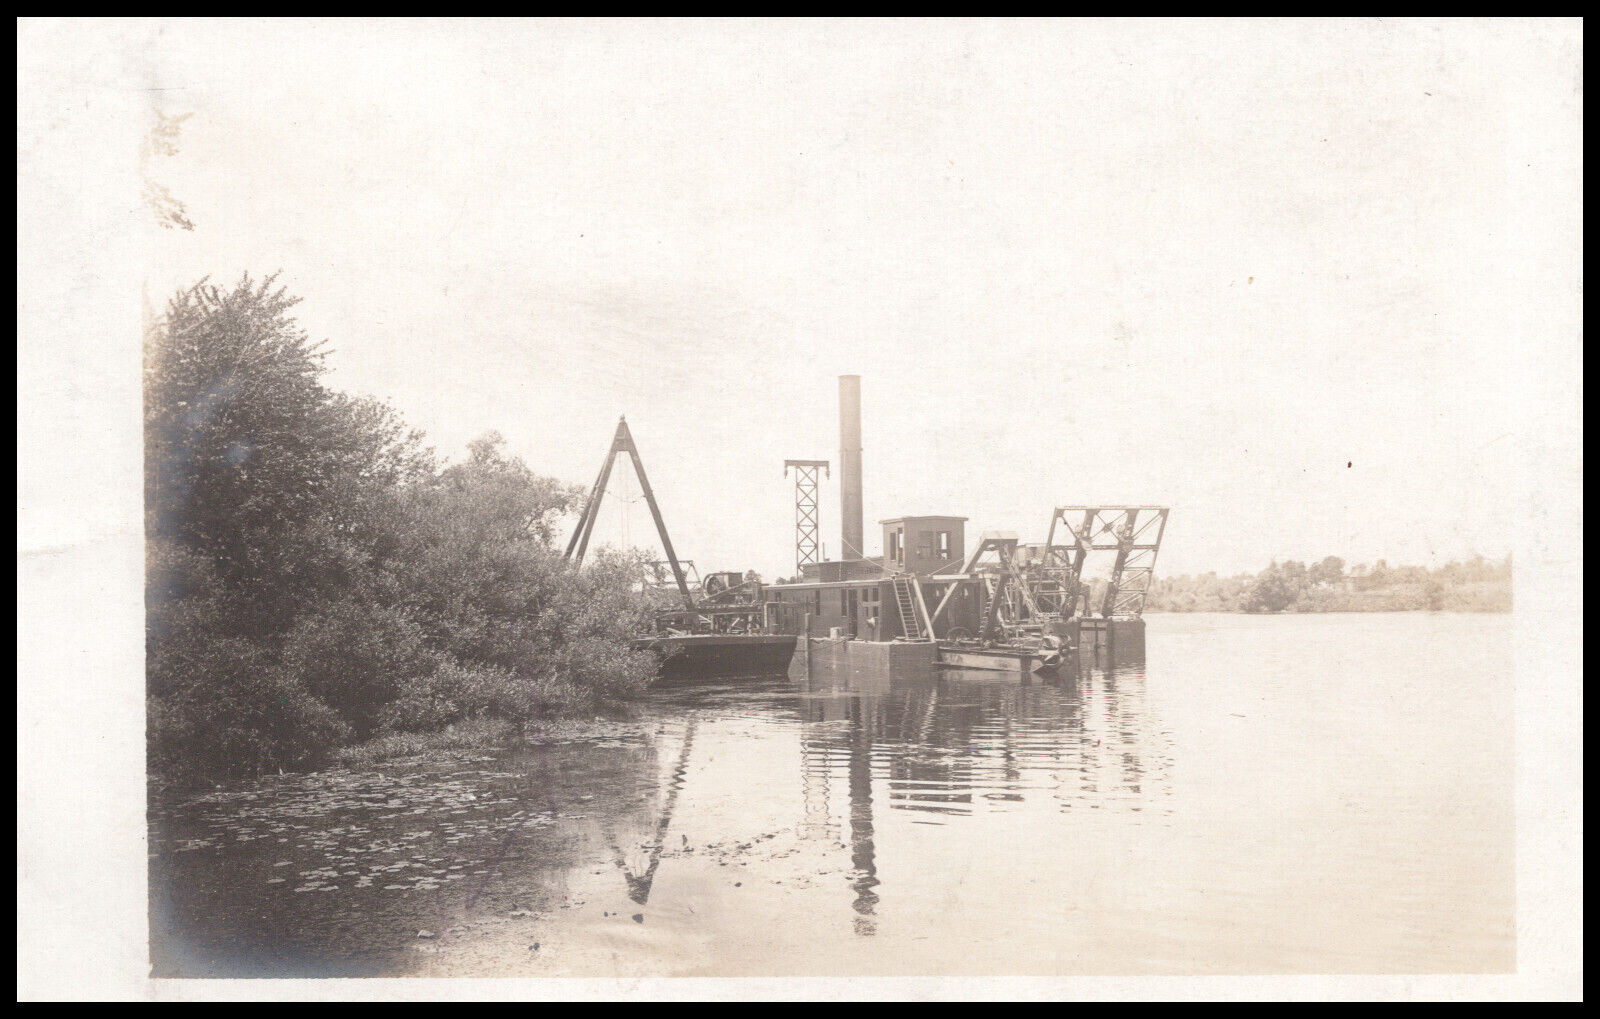 Downsville, New York, Dredging the River? Delaware Co, Real Photo Postcard RPPC